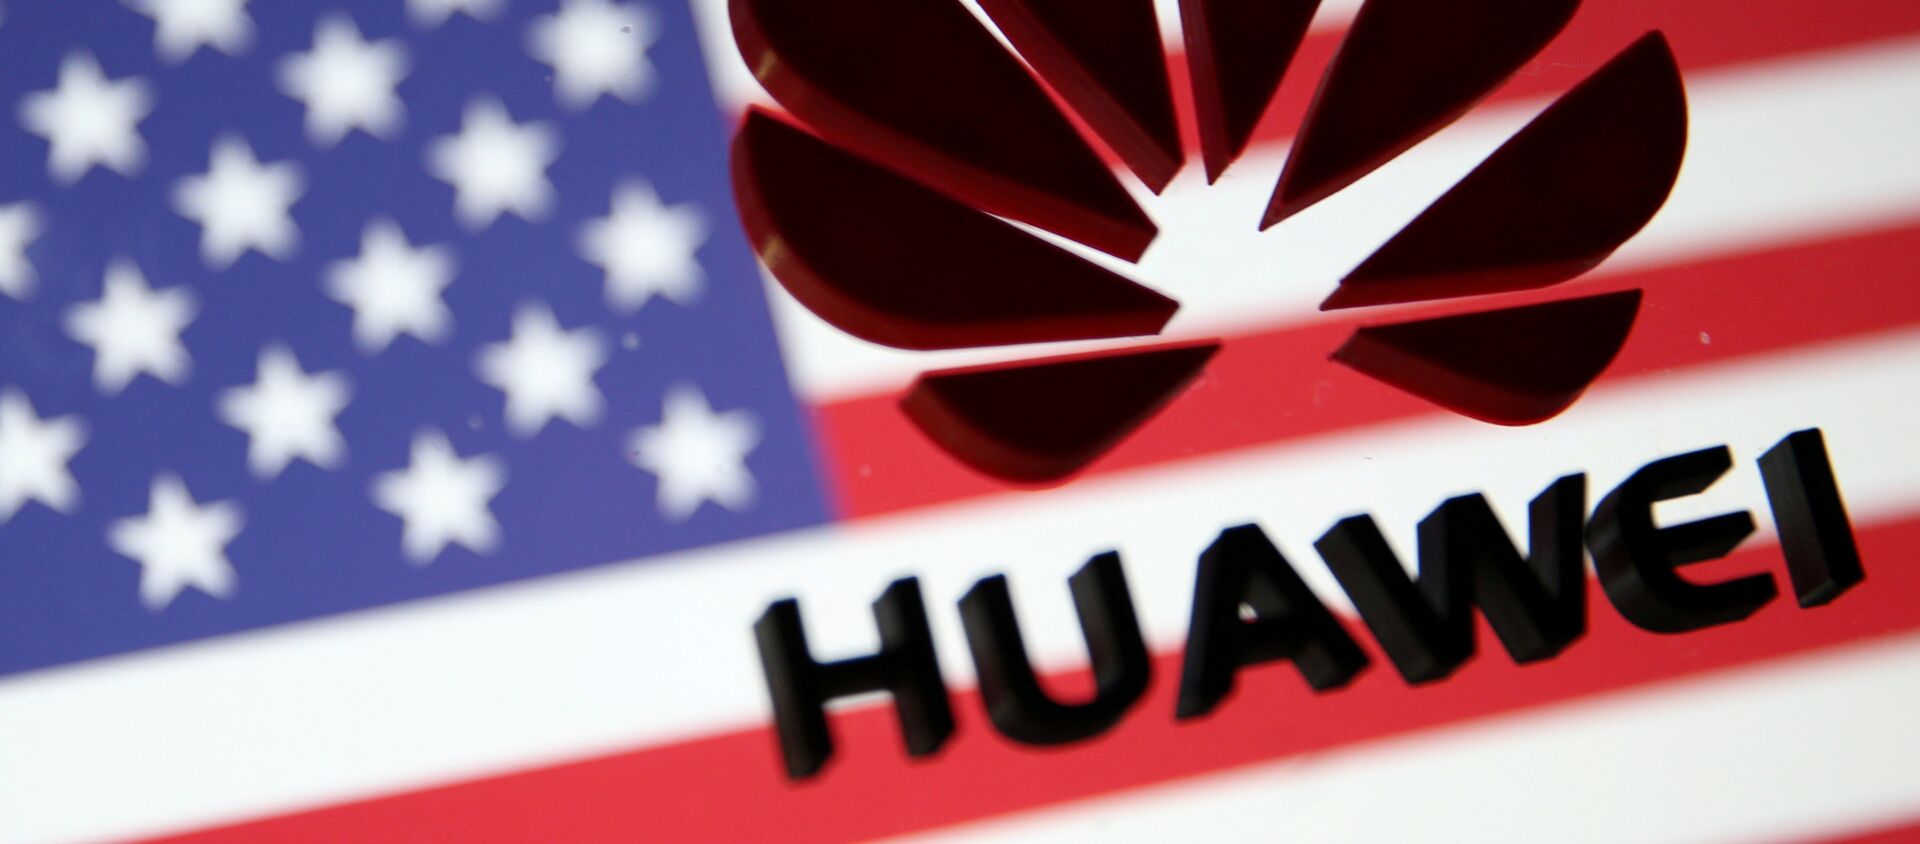 A 3D printed Huawei logo is placed on glass above a displayed U.S. flag in this illustration - 俄羅斯衛星通訊社, 1920, 18.06.2021